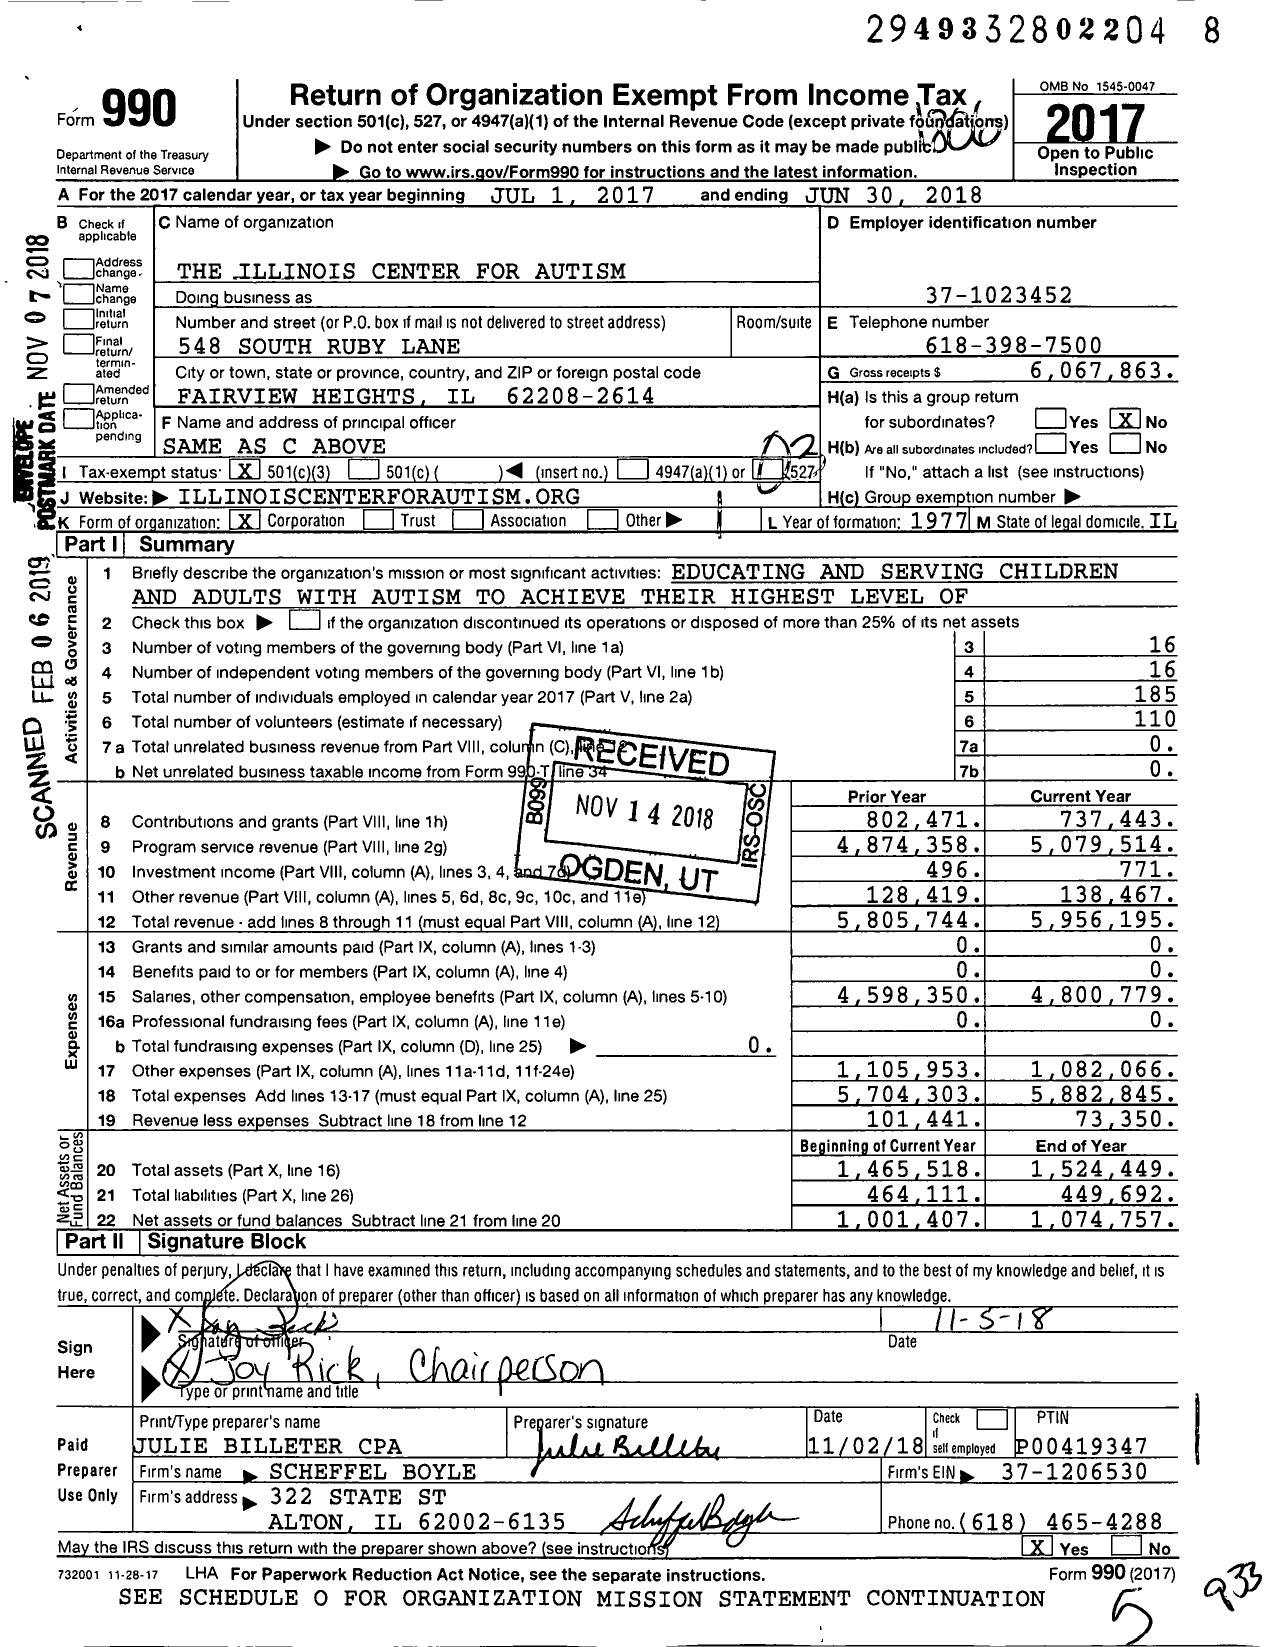 Image of first page of 2017 Form 990 for Illinois Center for Autism (ICA)